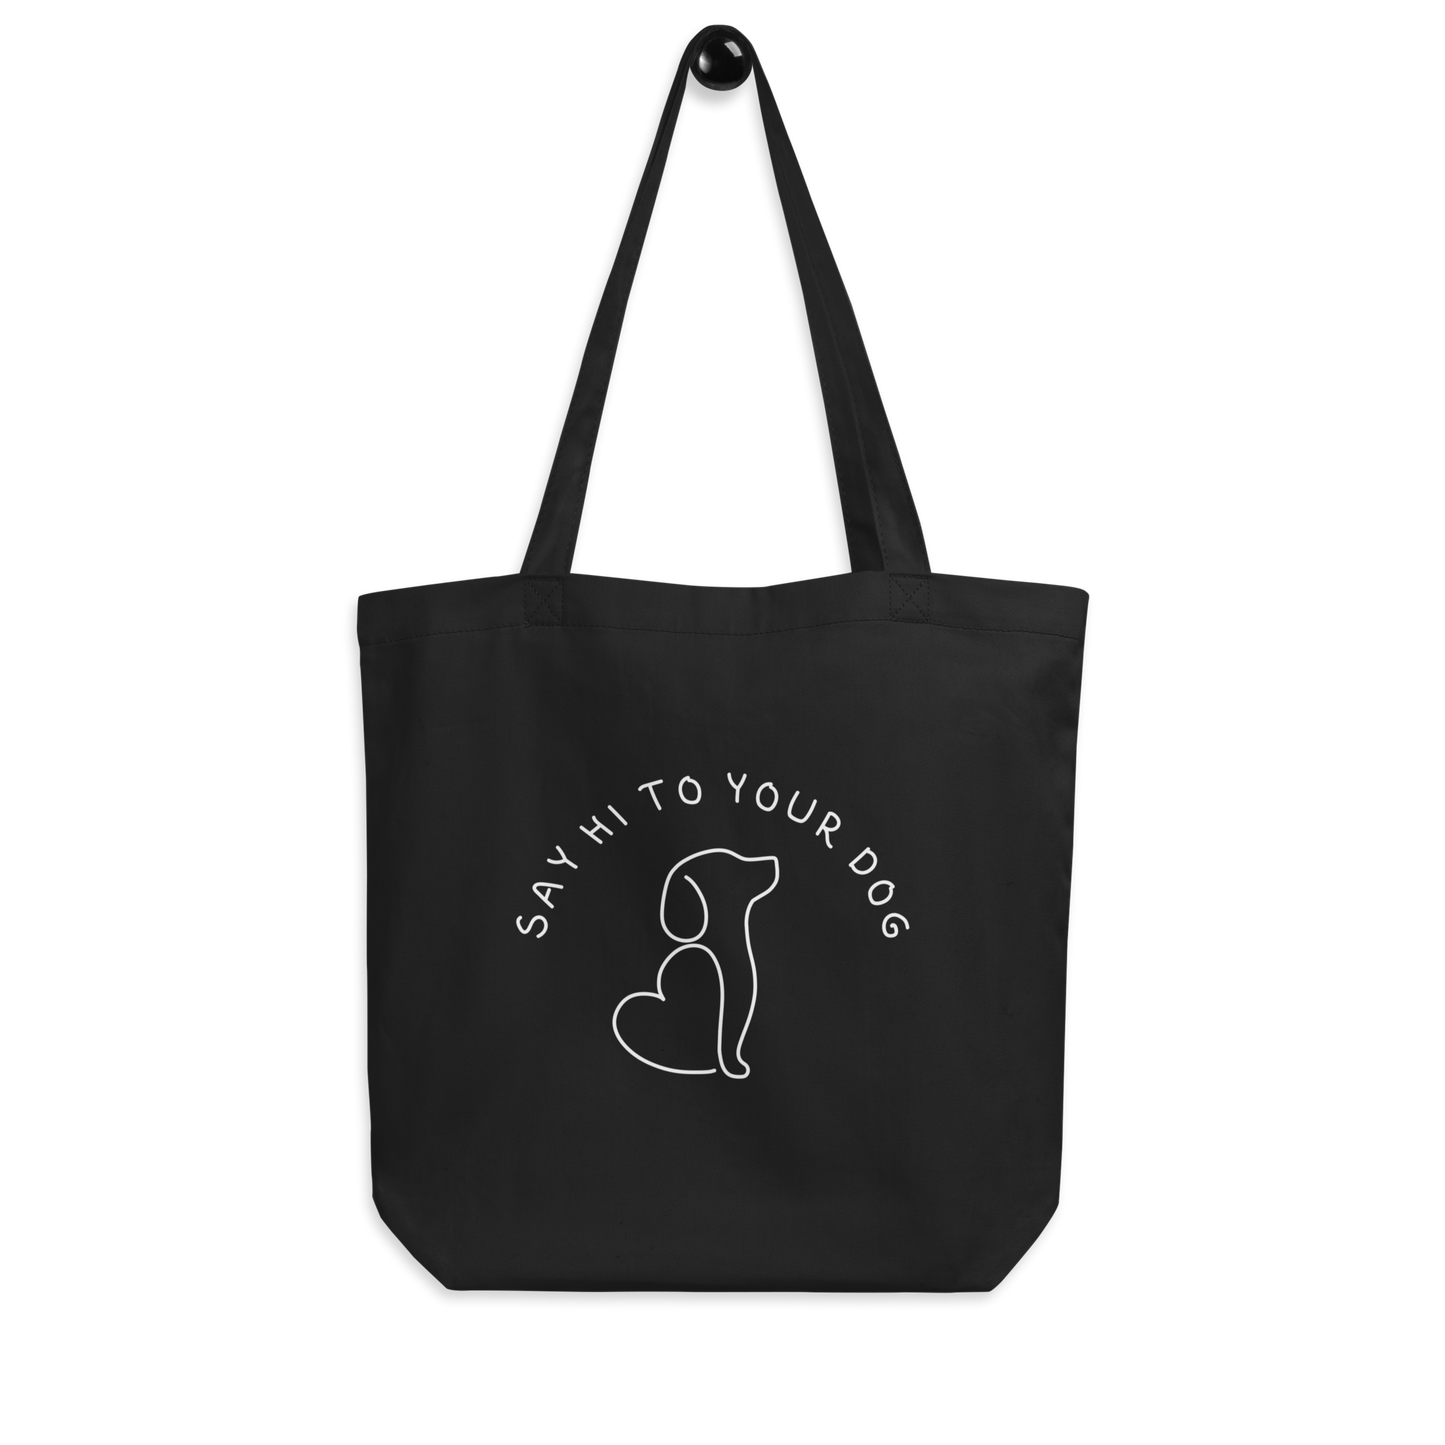 Say Hi to Your Dog Tote